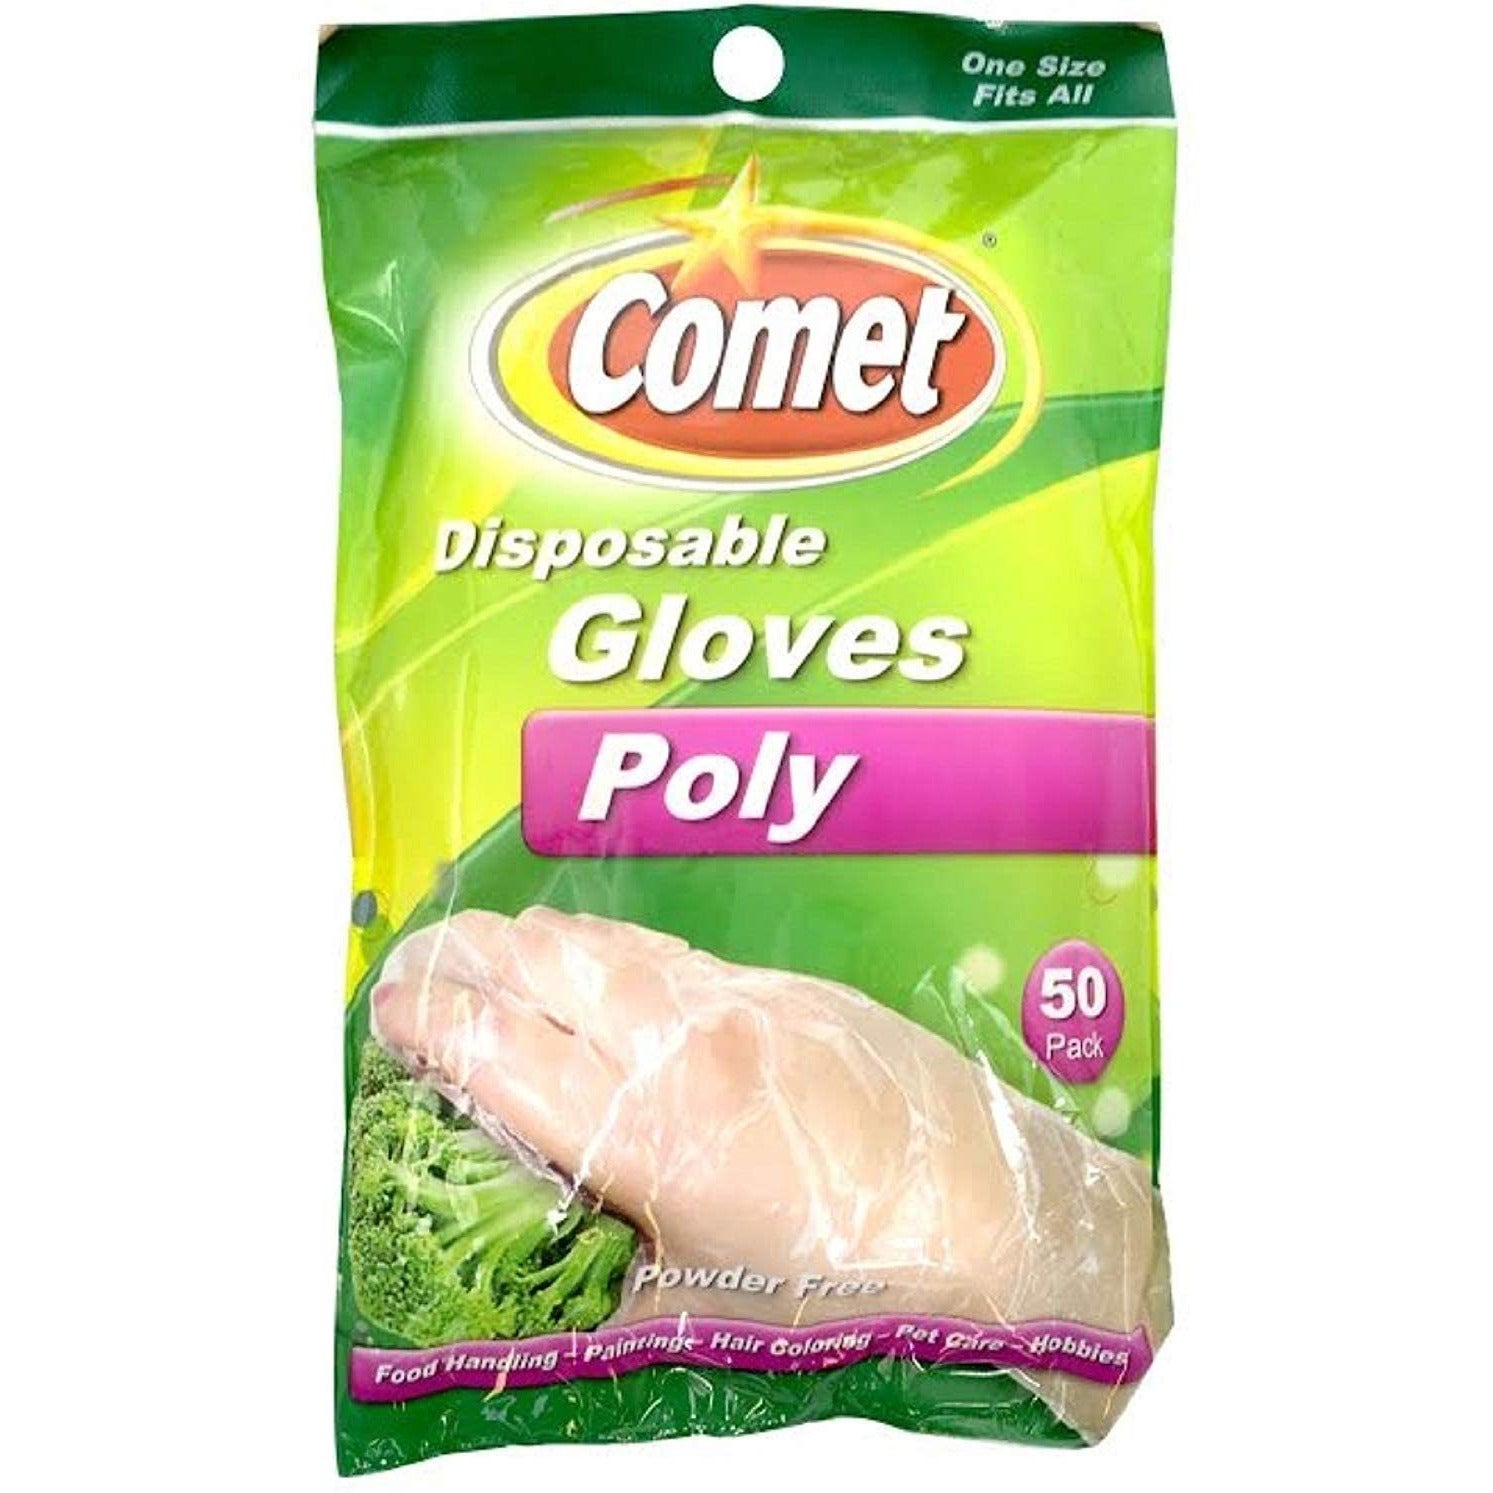 Comet, 5 Pack, Disposable Gloves, Poly, One Size Fits All 50 ea